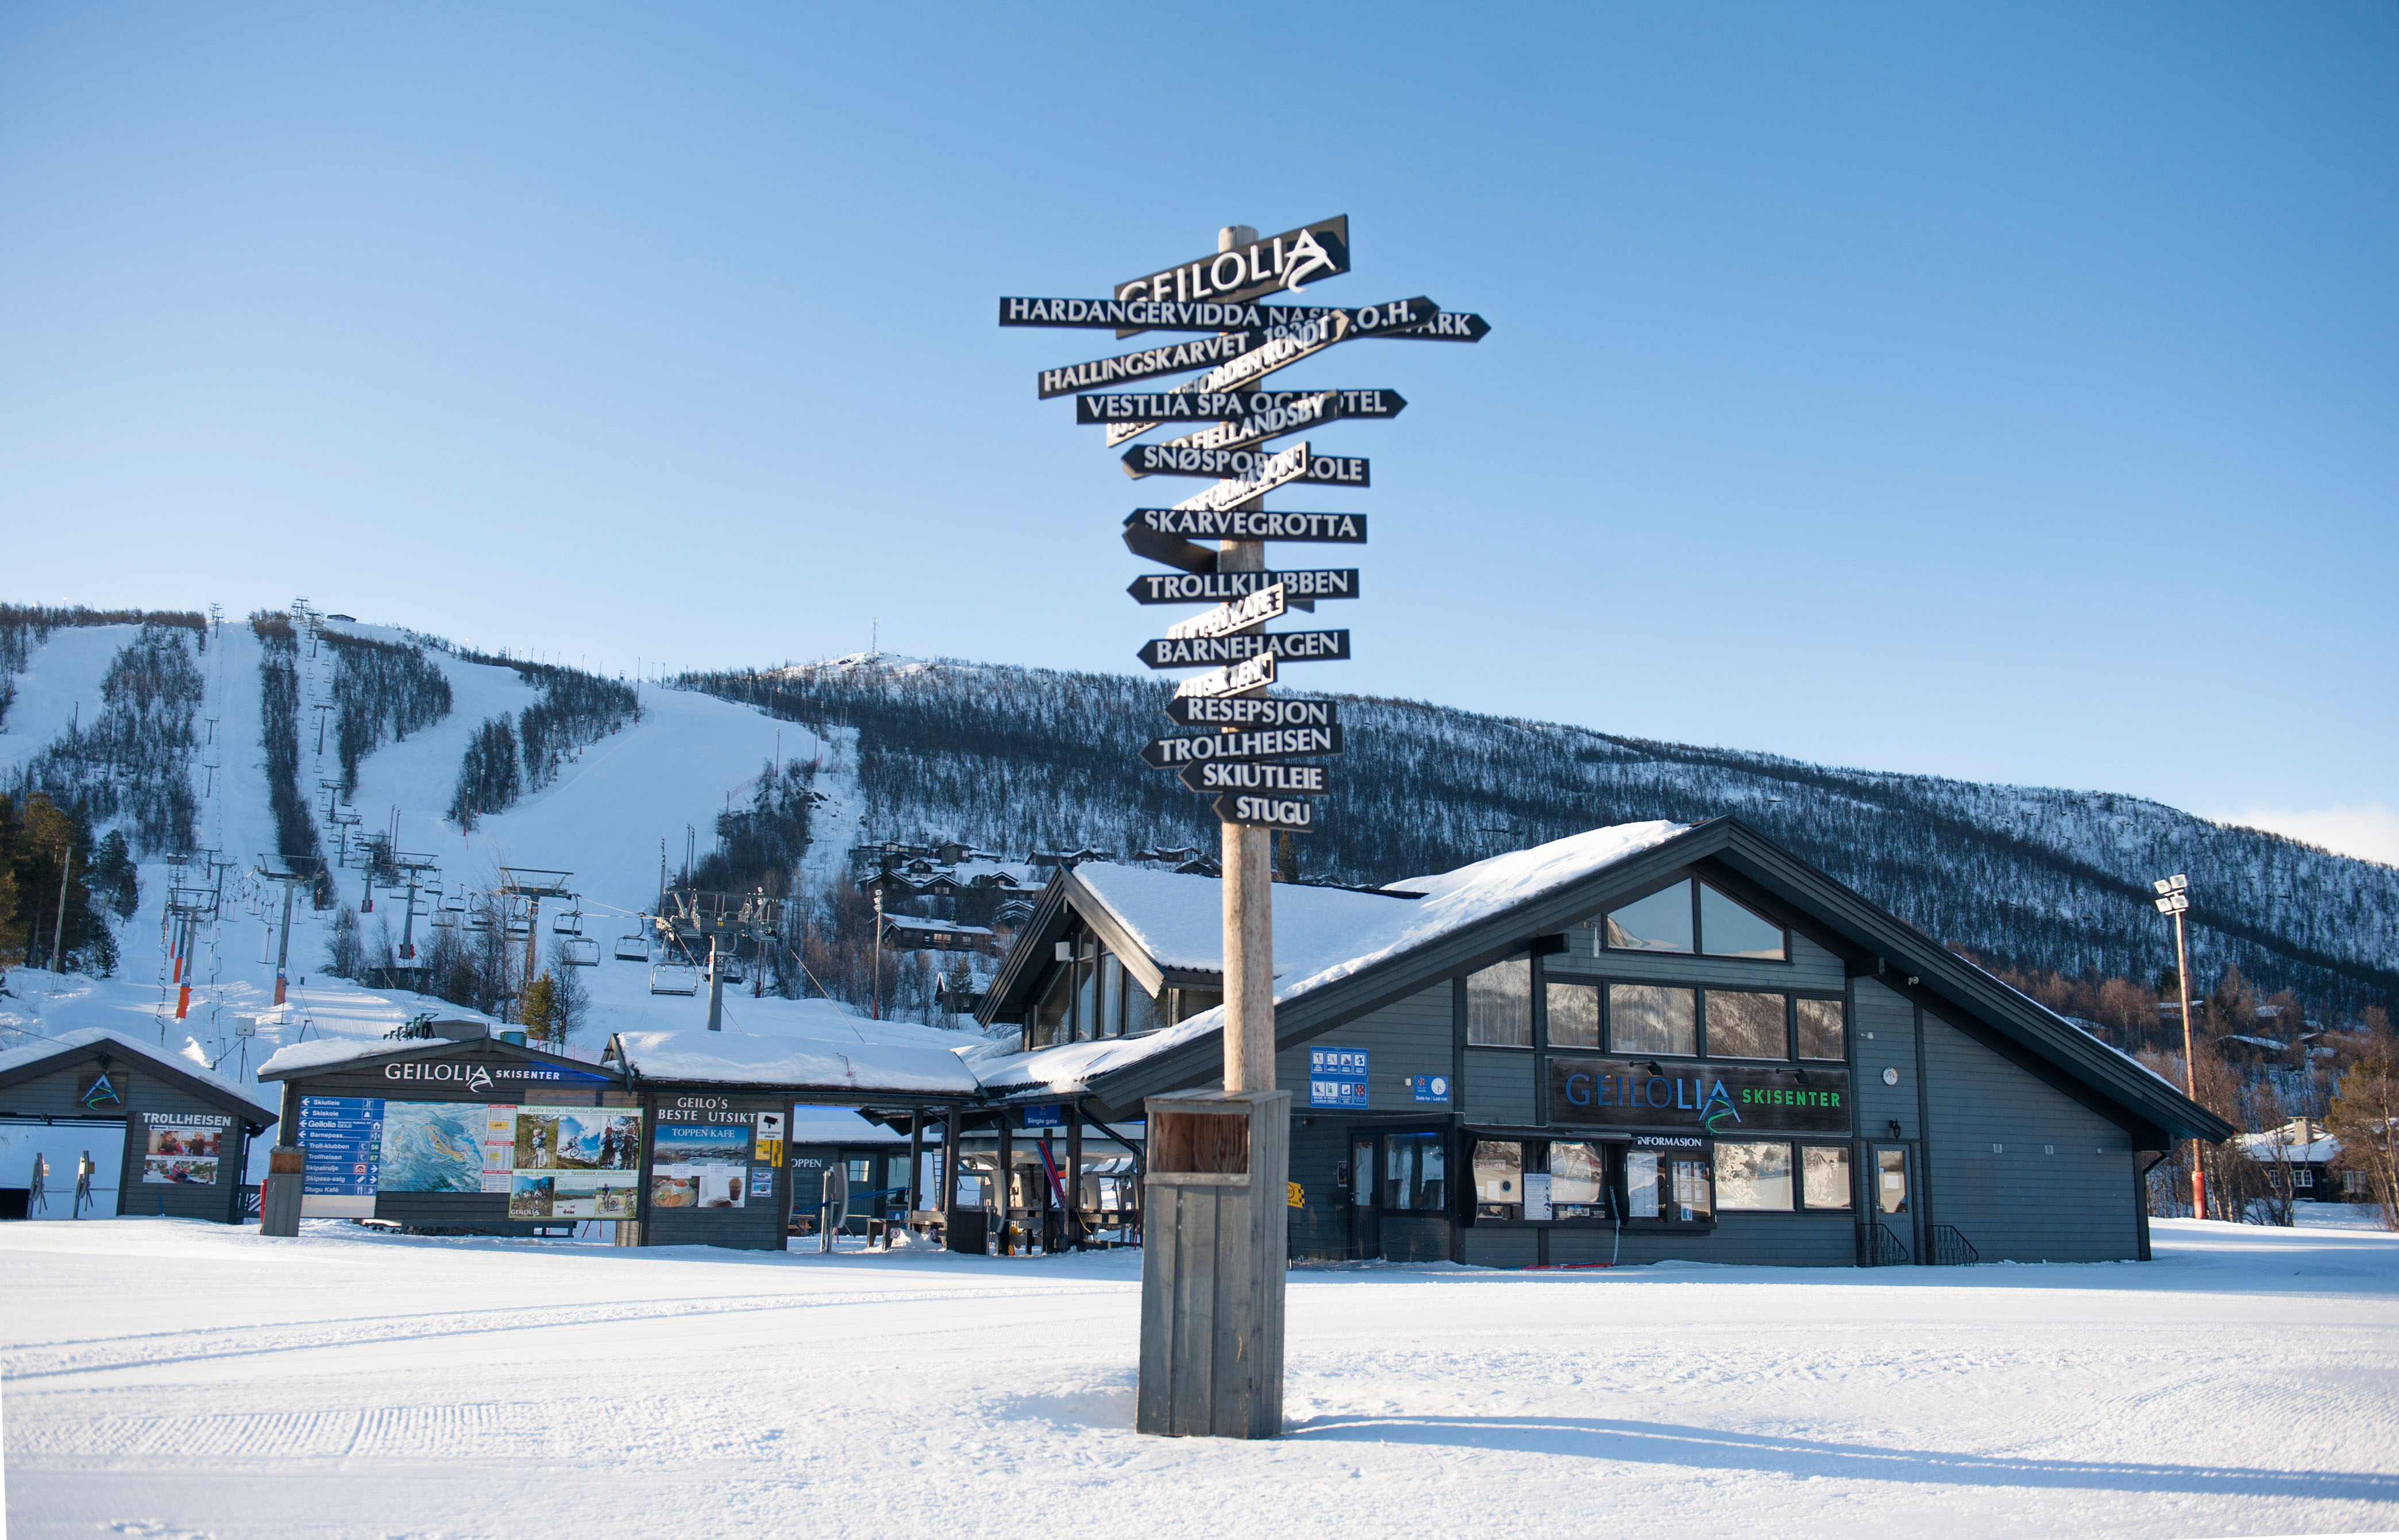 The village of Geilo is a family-friendly resort three hours’ drive from Oslo and sandwiched between two national parks